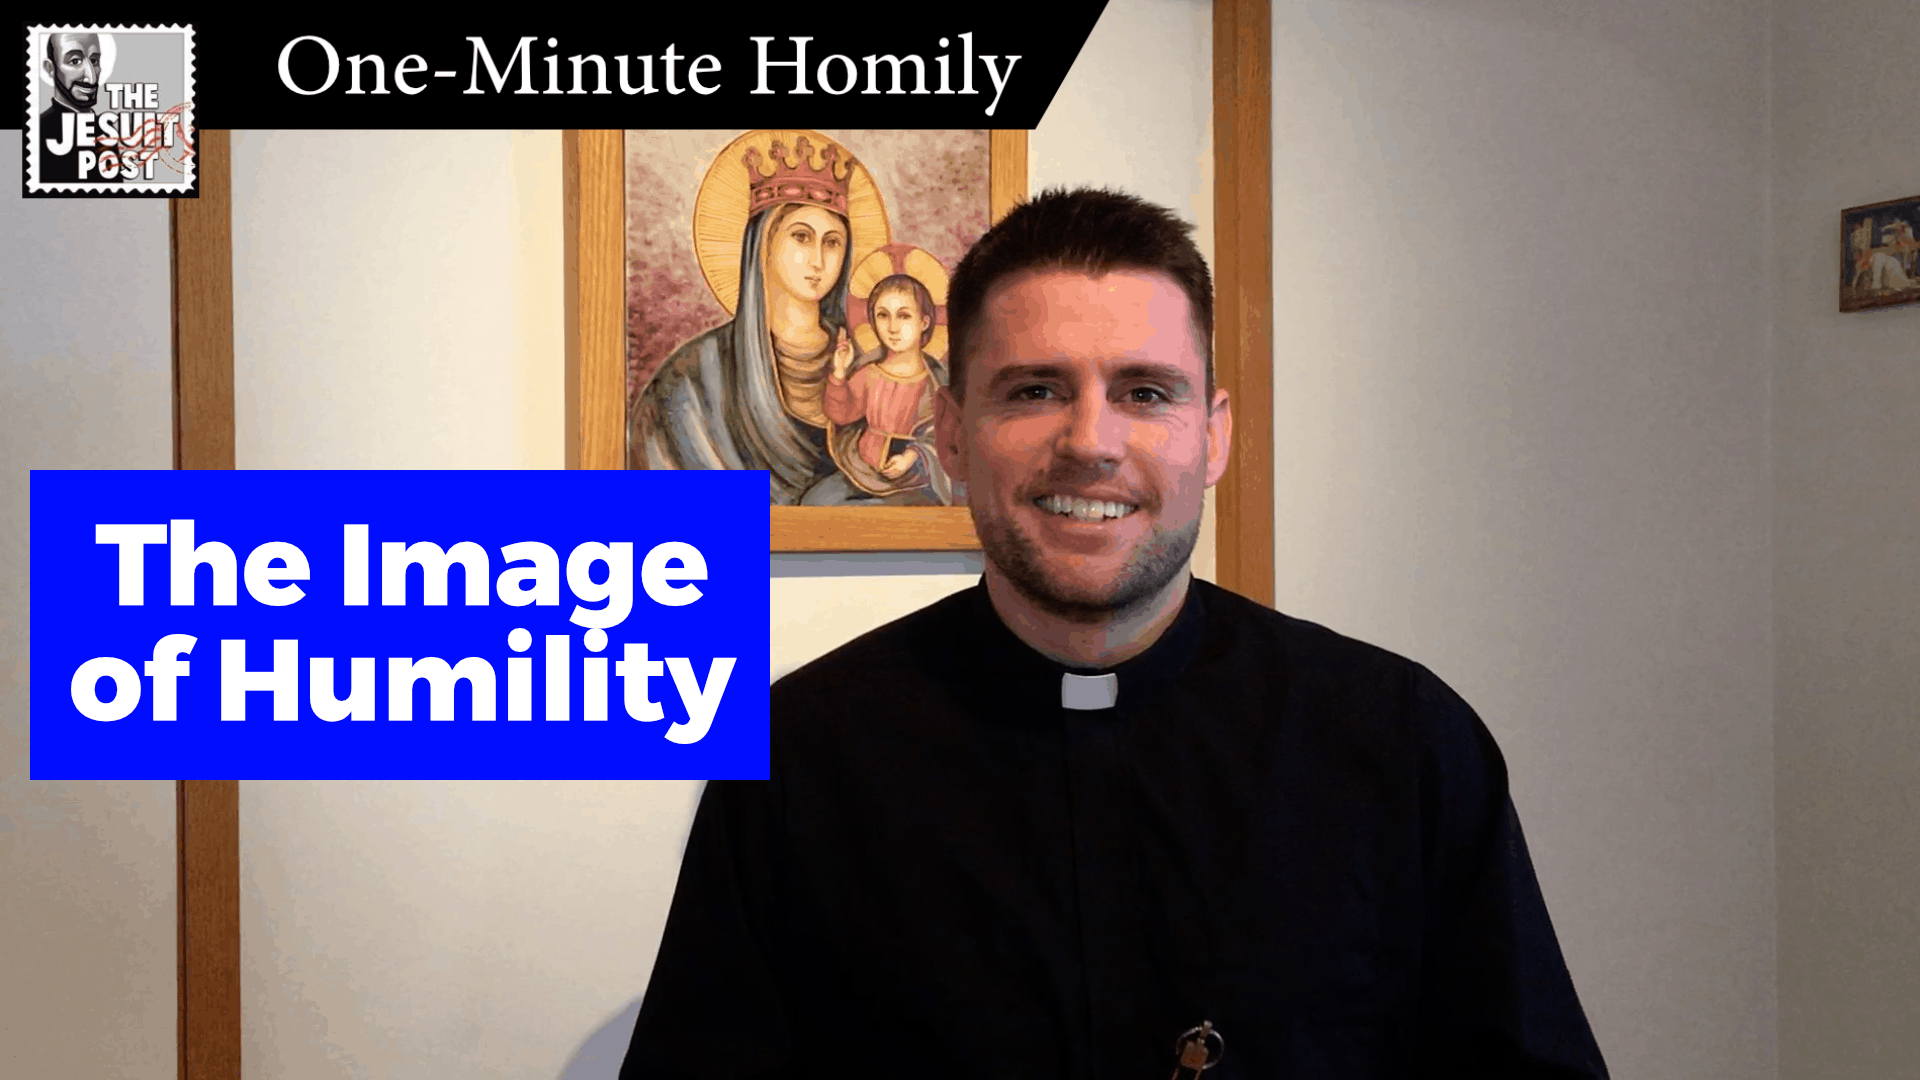 One-Minute Homily: “The Image of Humility”